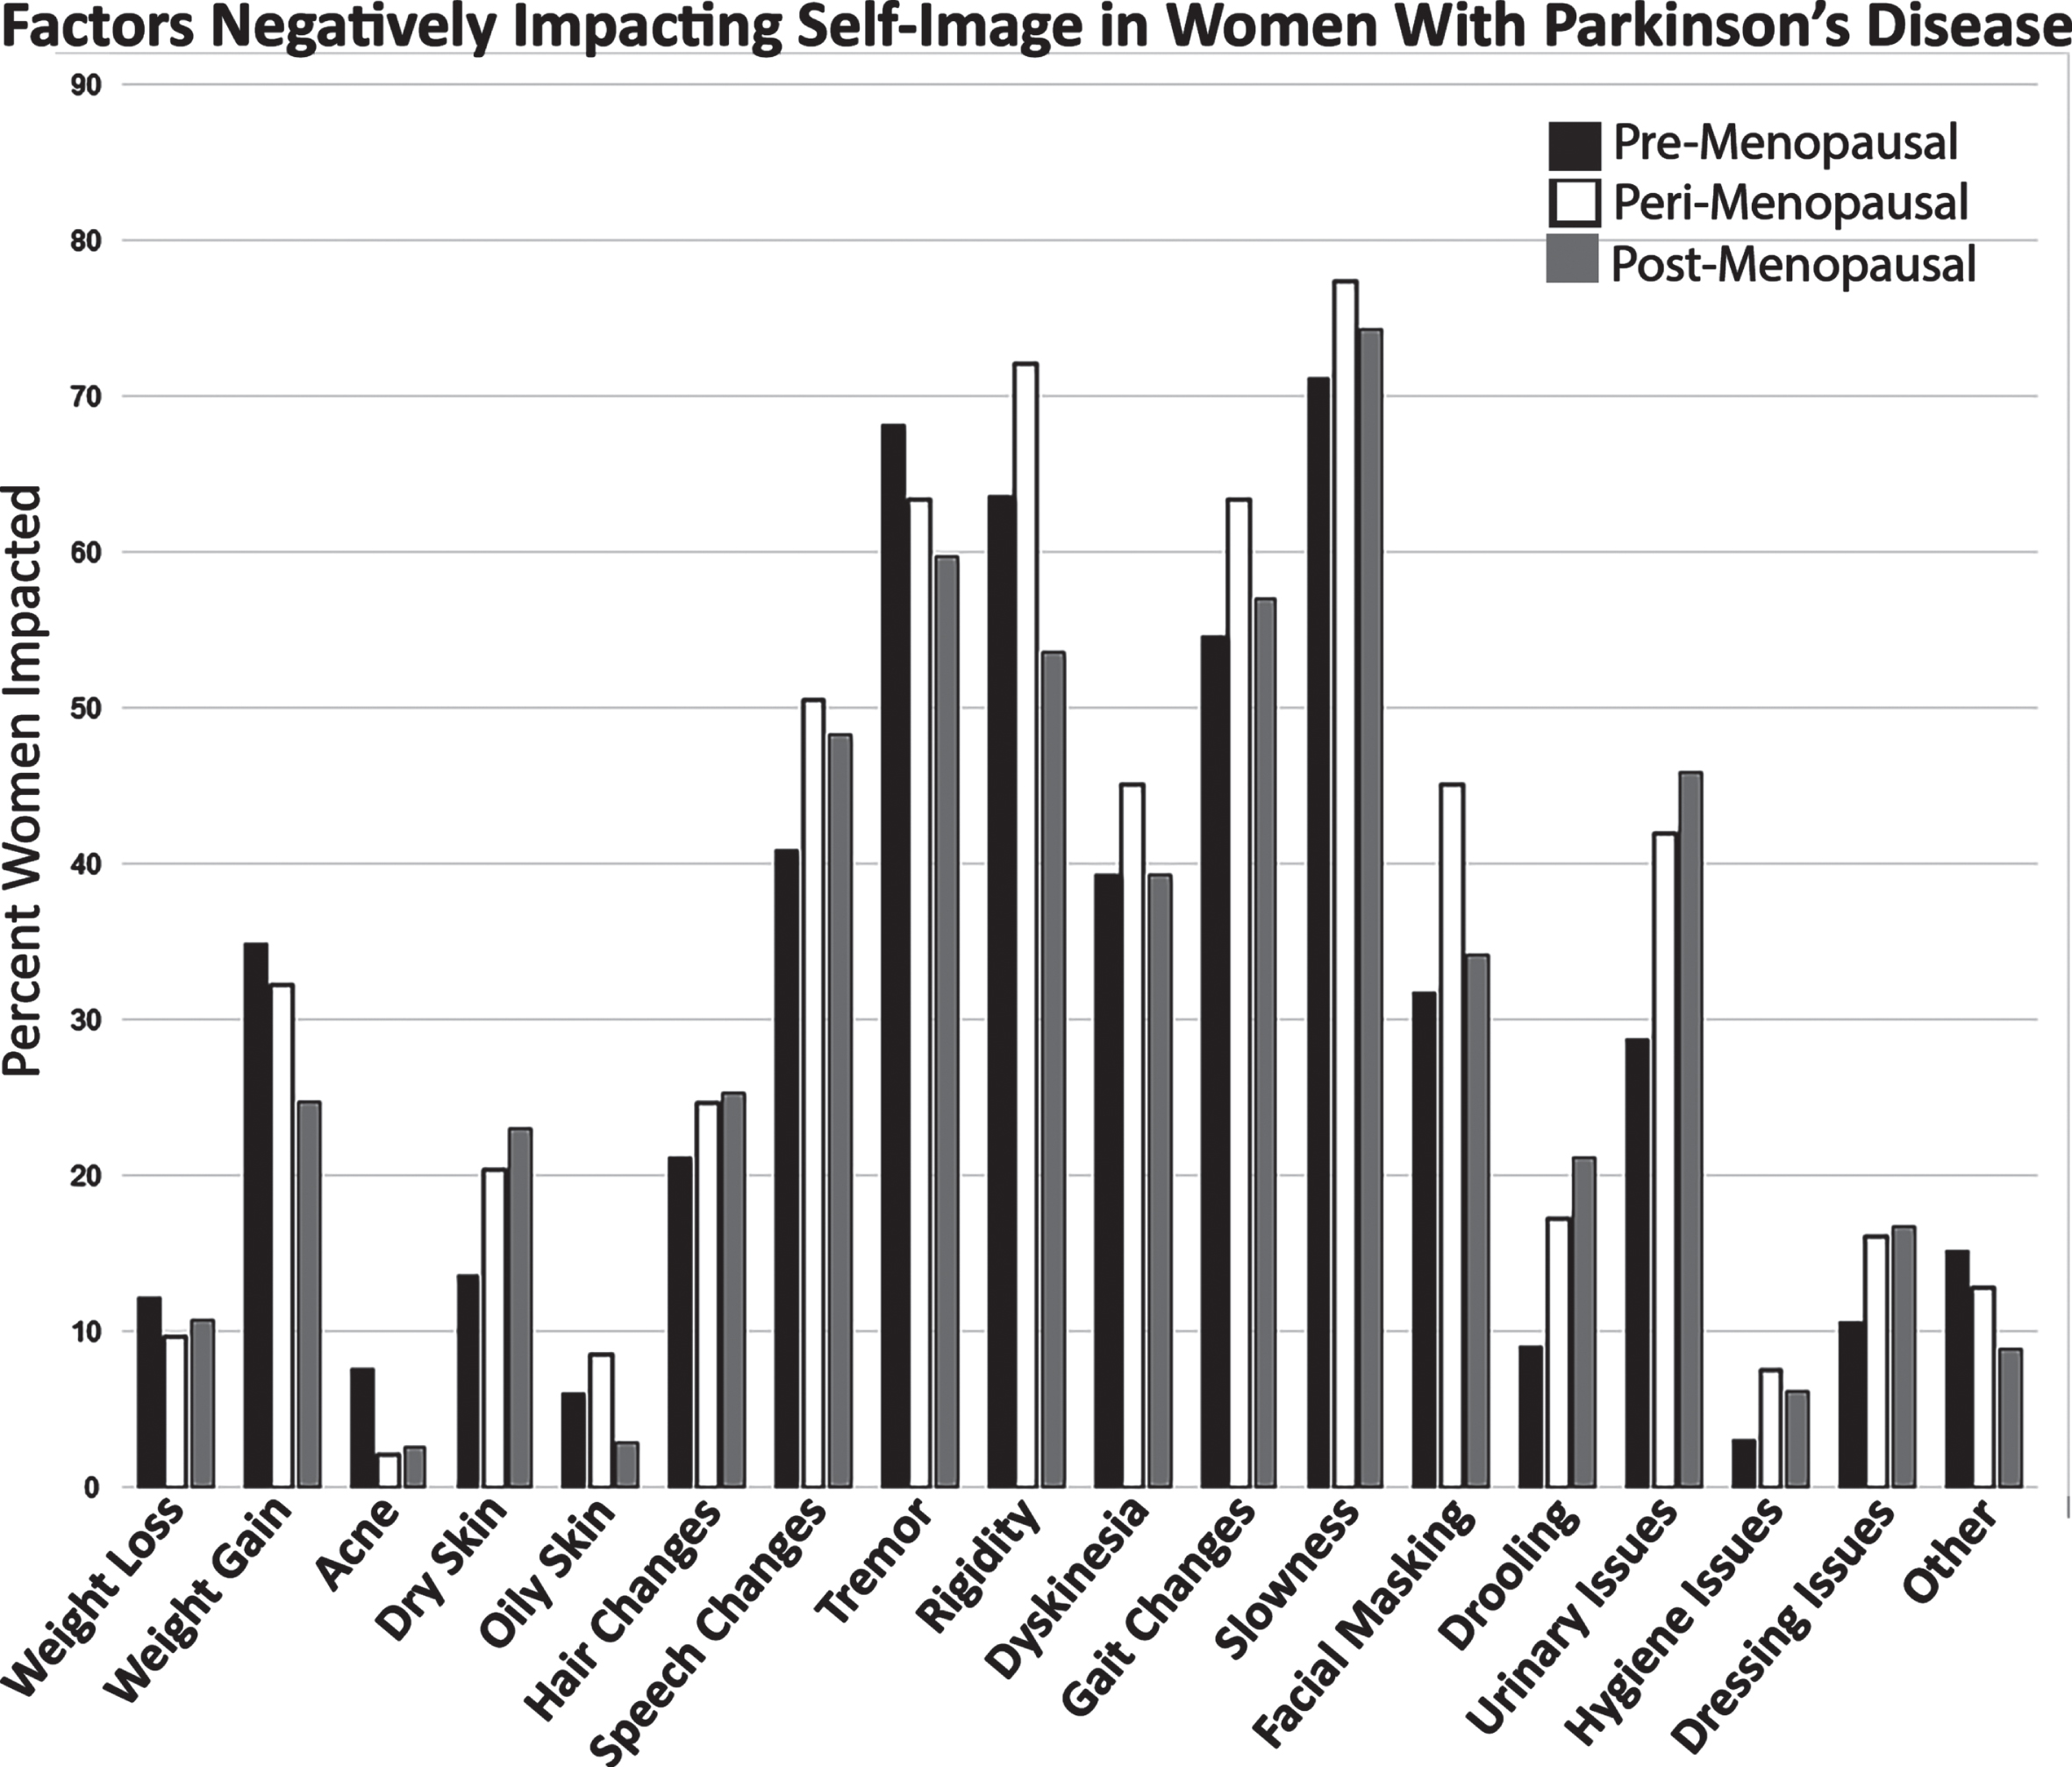 Factors Negatively Impacting Self-Image in Women with PD. The data indicate that the slowness, rigidity, and tremor had the greatest impact on negative self-image. This is closely followed by urinary issues, speech changes, and dyskinesia.